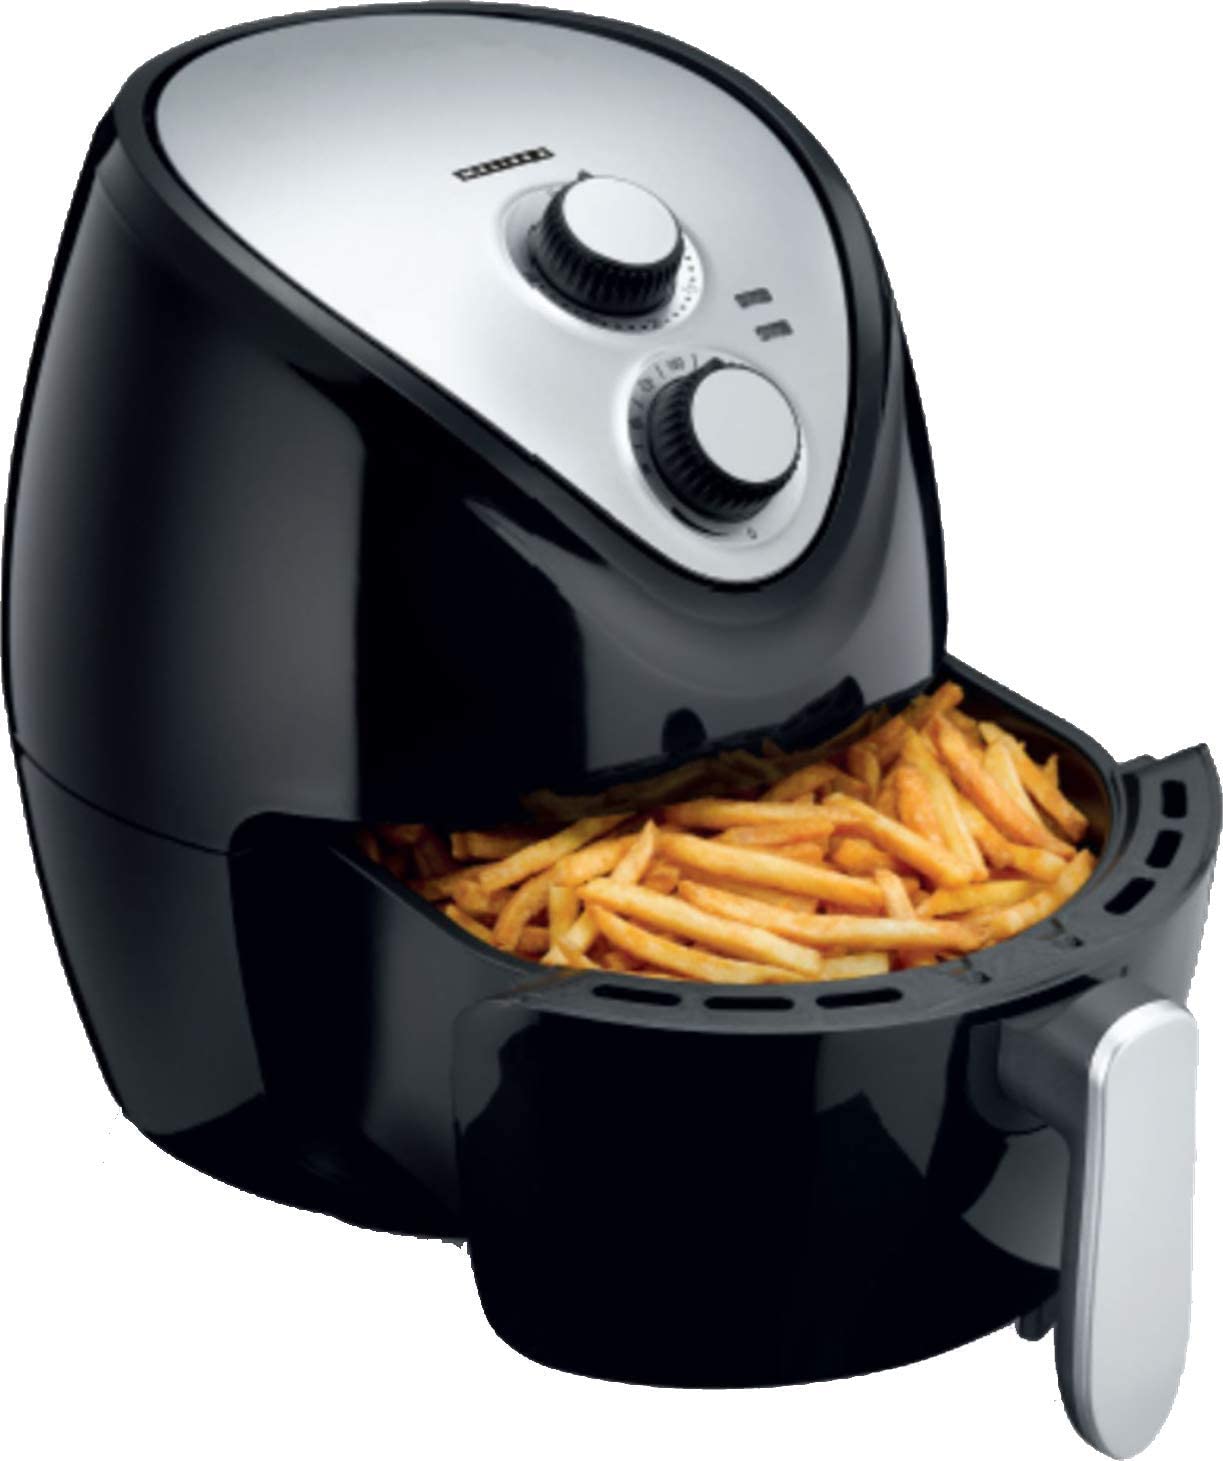 Melissa 16290038 Hot Air Fryer with Timer and Thermostat 1000 Watt 2.0 Litres Black